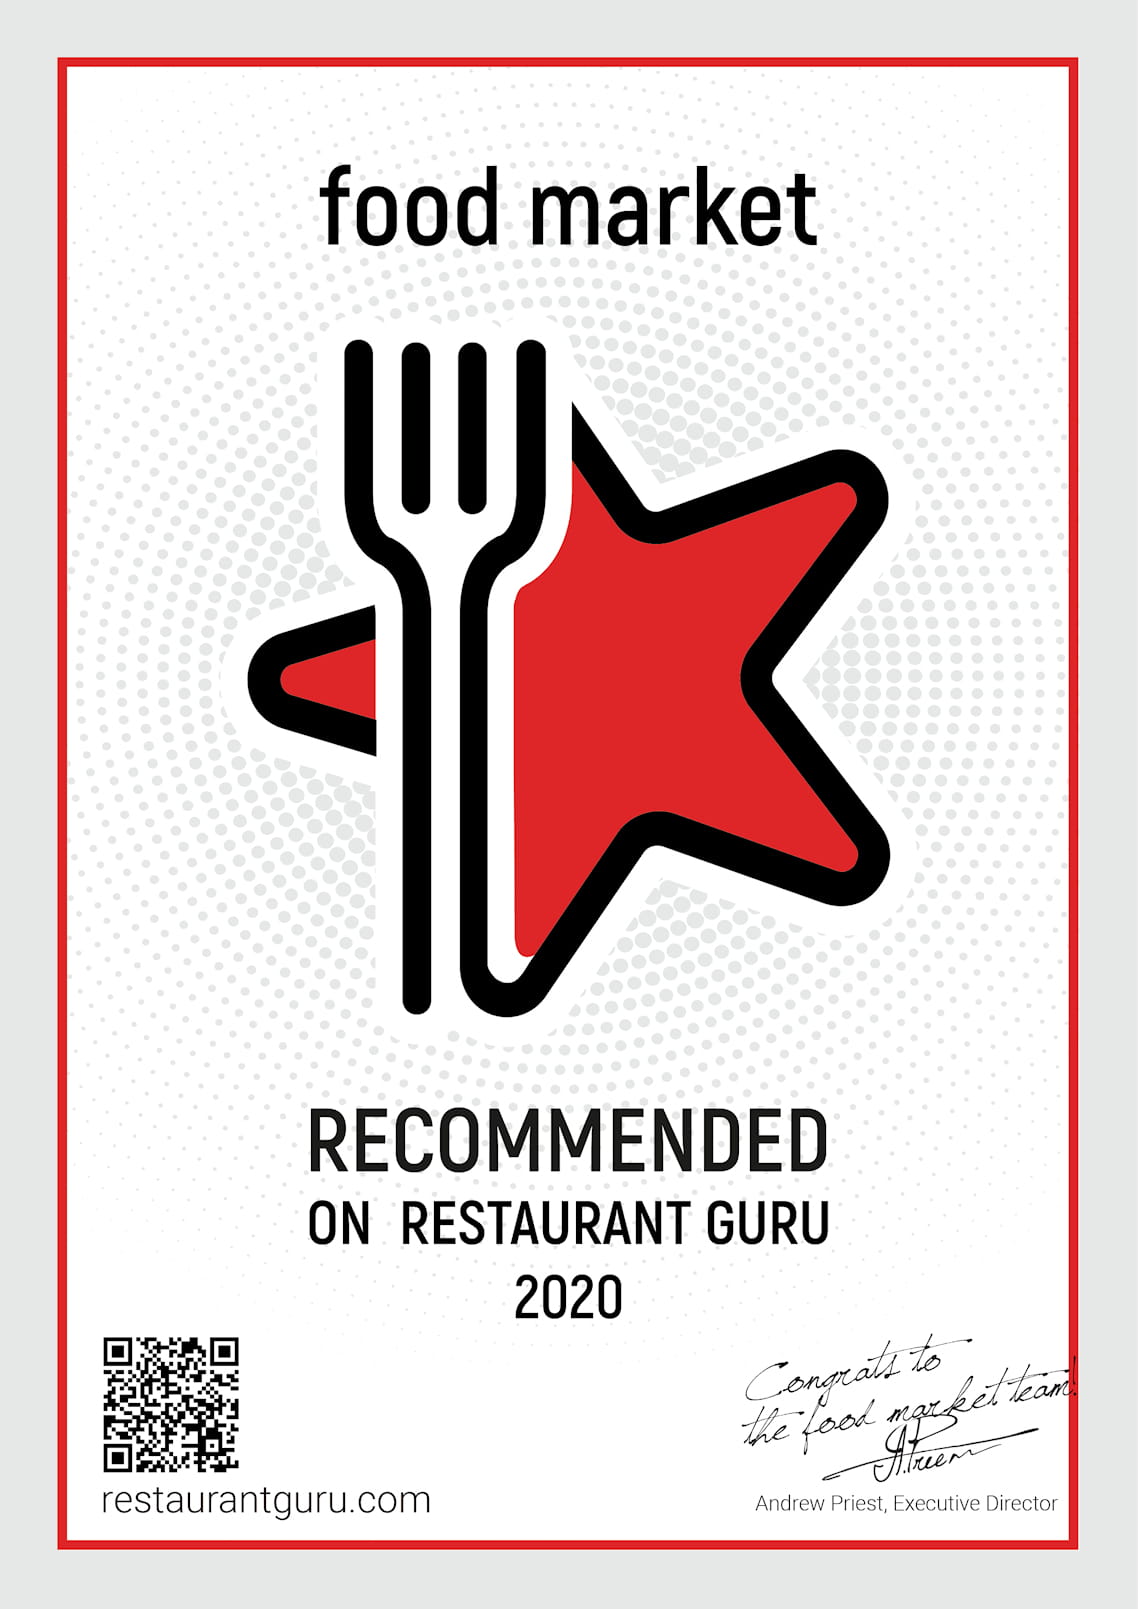 Food Market Kata is recommended by Restaurant Guru